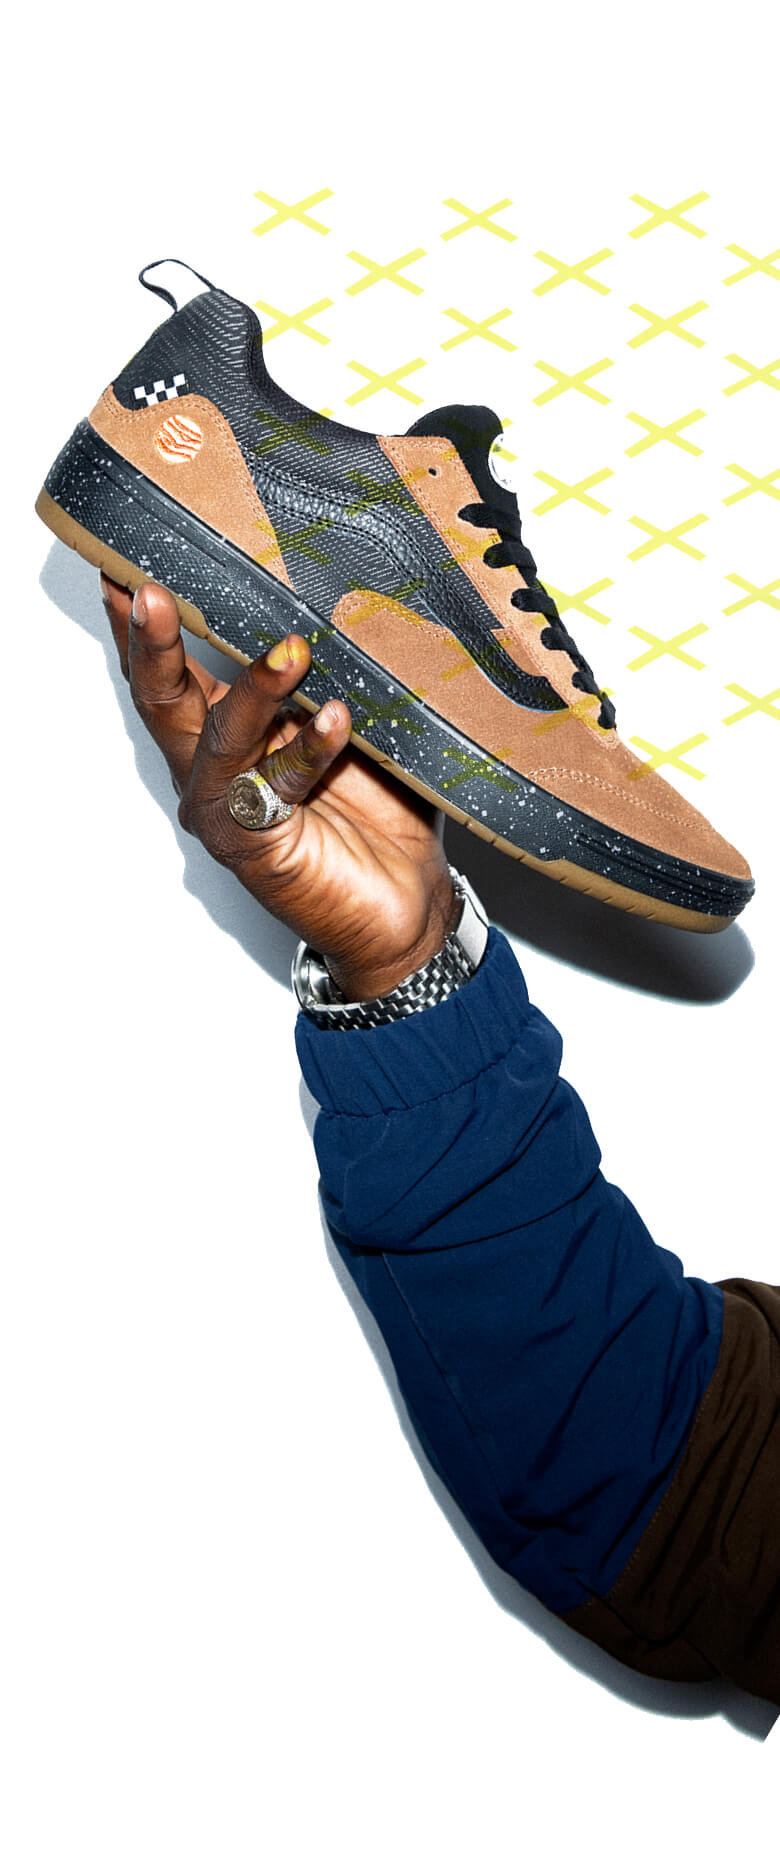 Zion Wright's arm holding the Zhaba shoe with the Zion colorway overlaid with a yellow repeating x pattern.